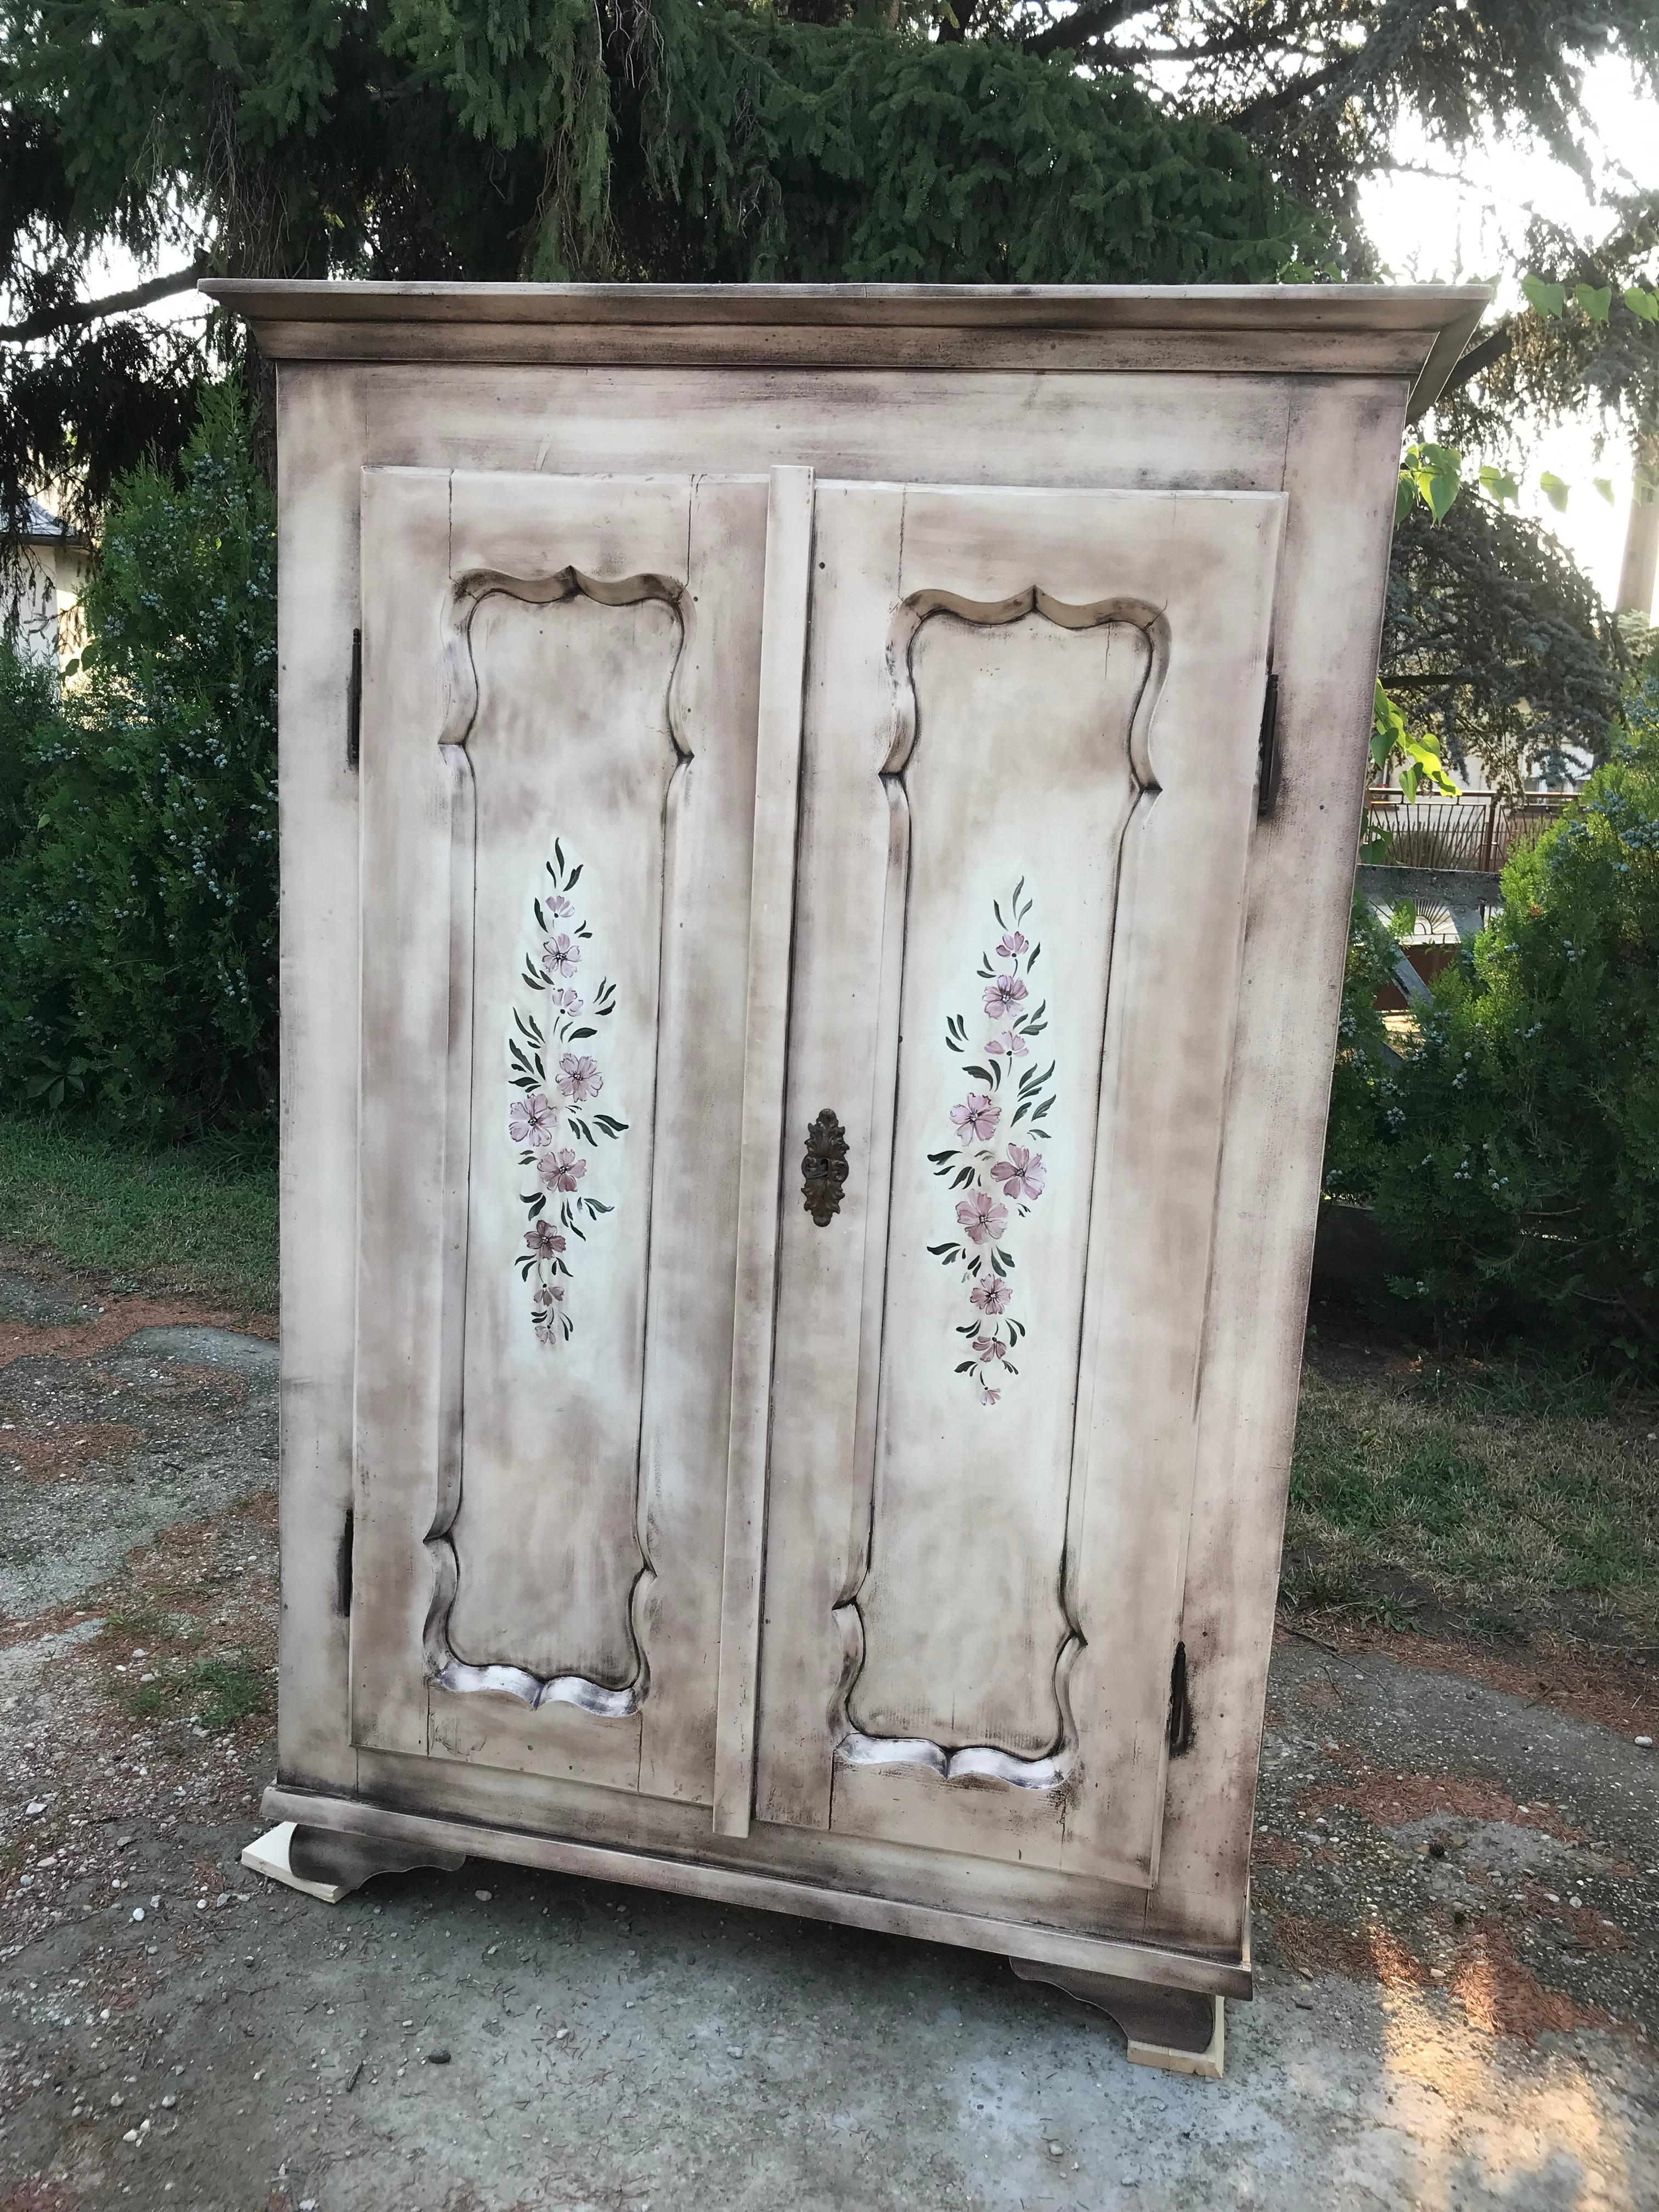 Antique double wardrobe.
Professionally restored, painted and antiqued.

This wardrobe is truly stunning.
After restoring the wardrobe we gave it a few base coats and a top coat of paint, after which we antiqued it, then the aritst painted